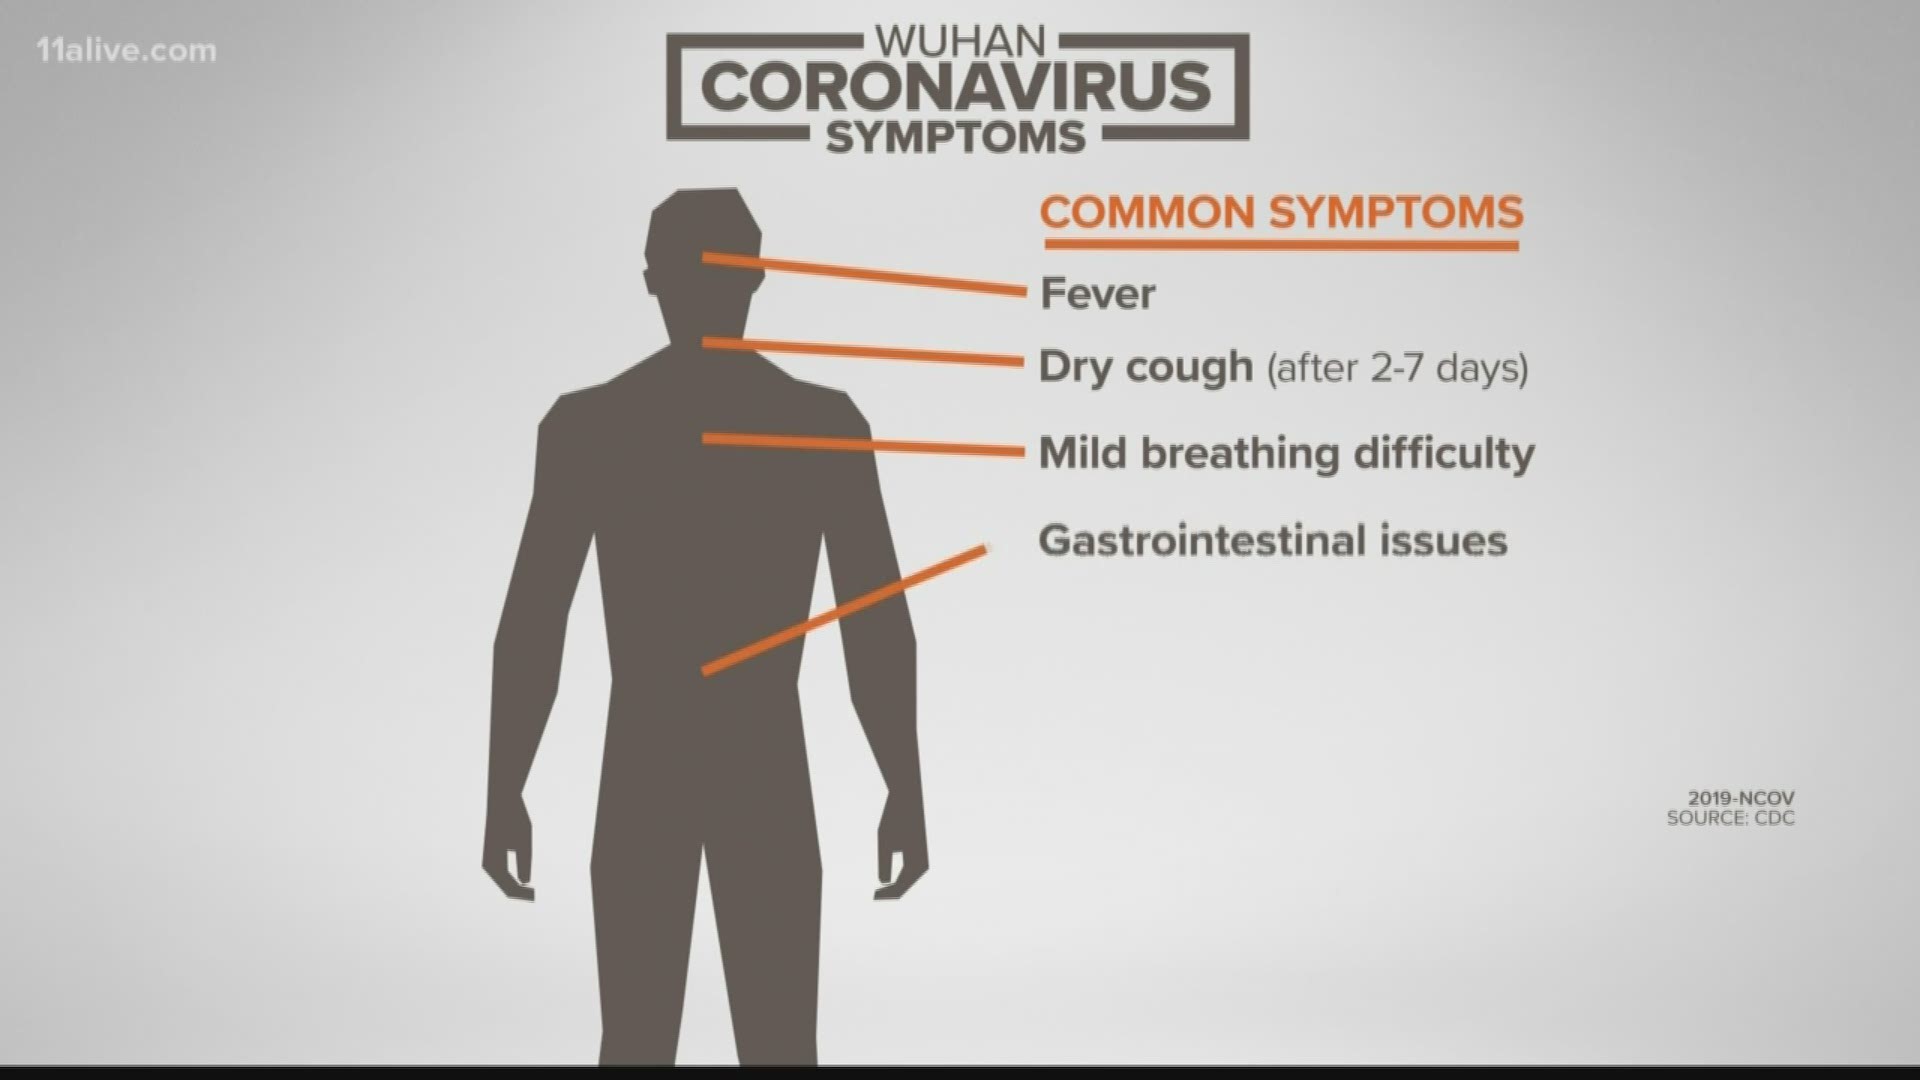 Here's a look at the symptoms.